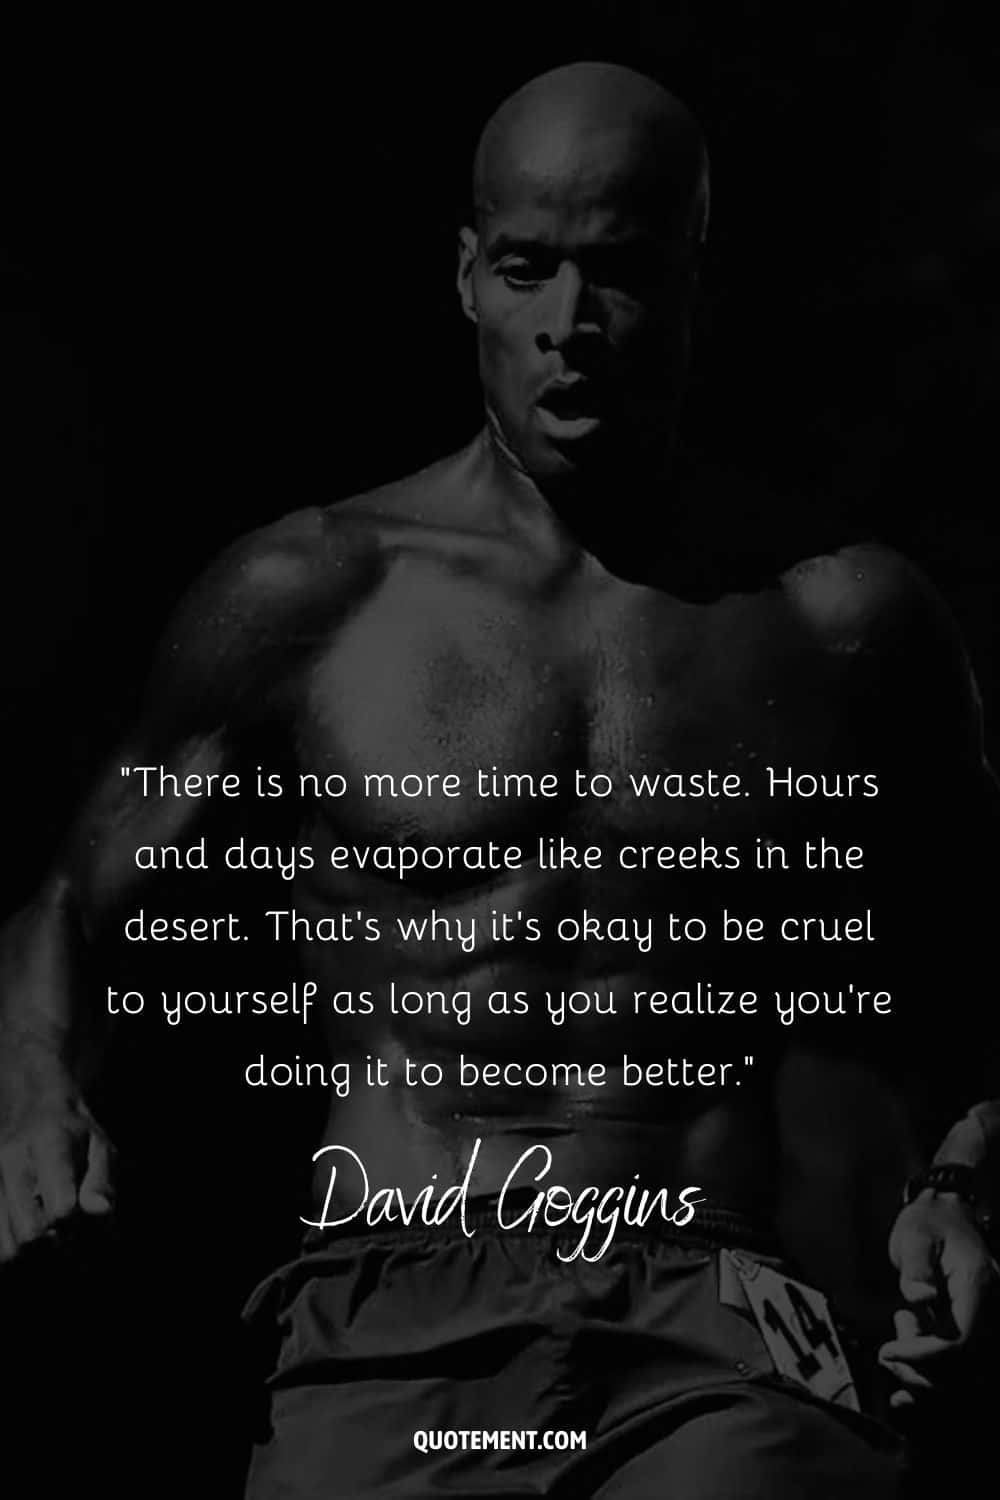 Motivational David Goggins quote and his photo in the background